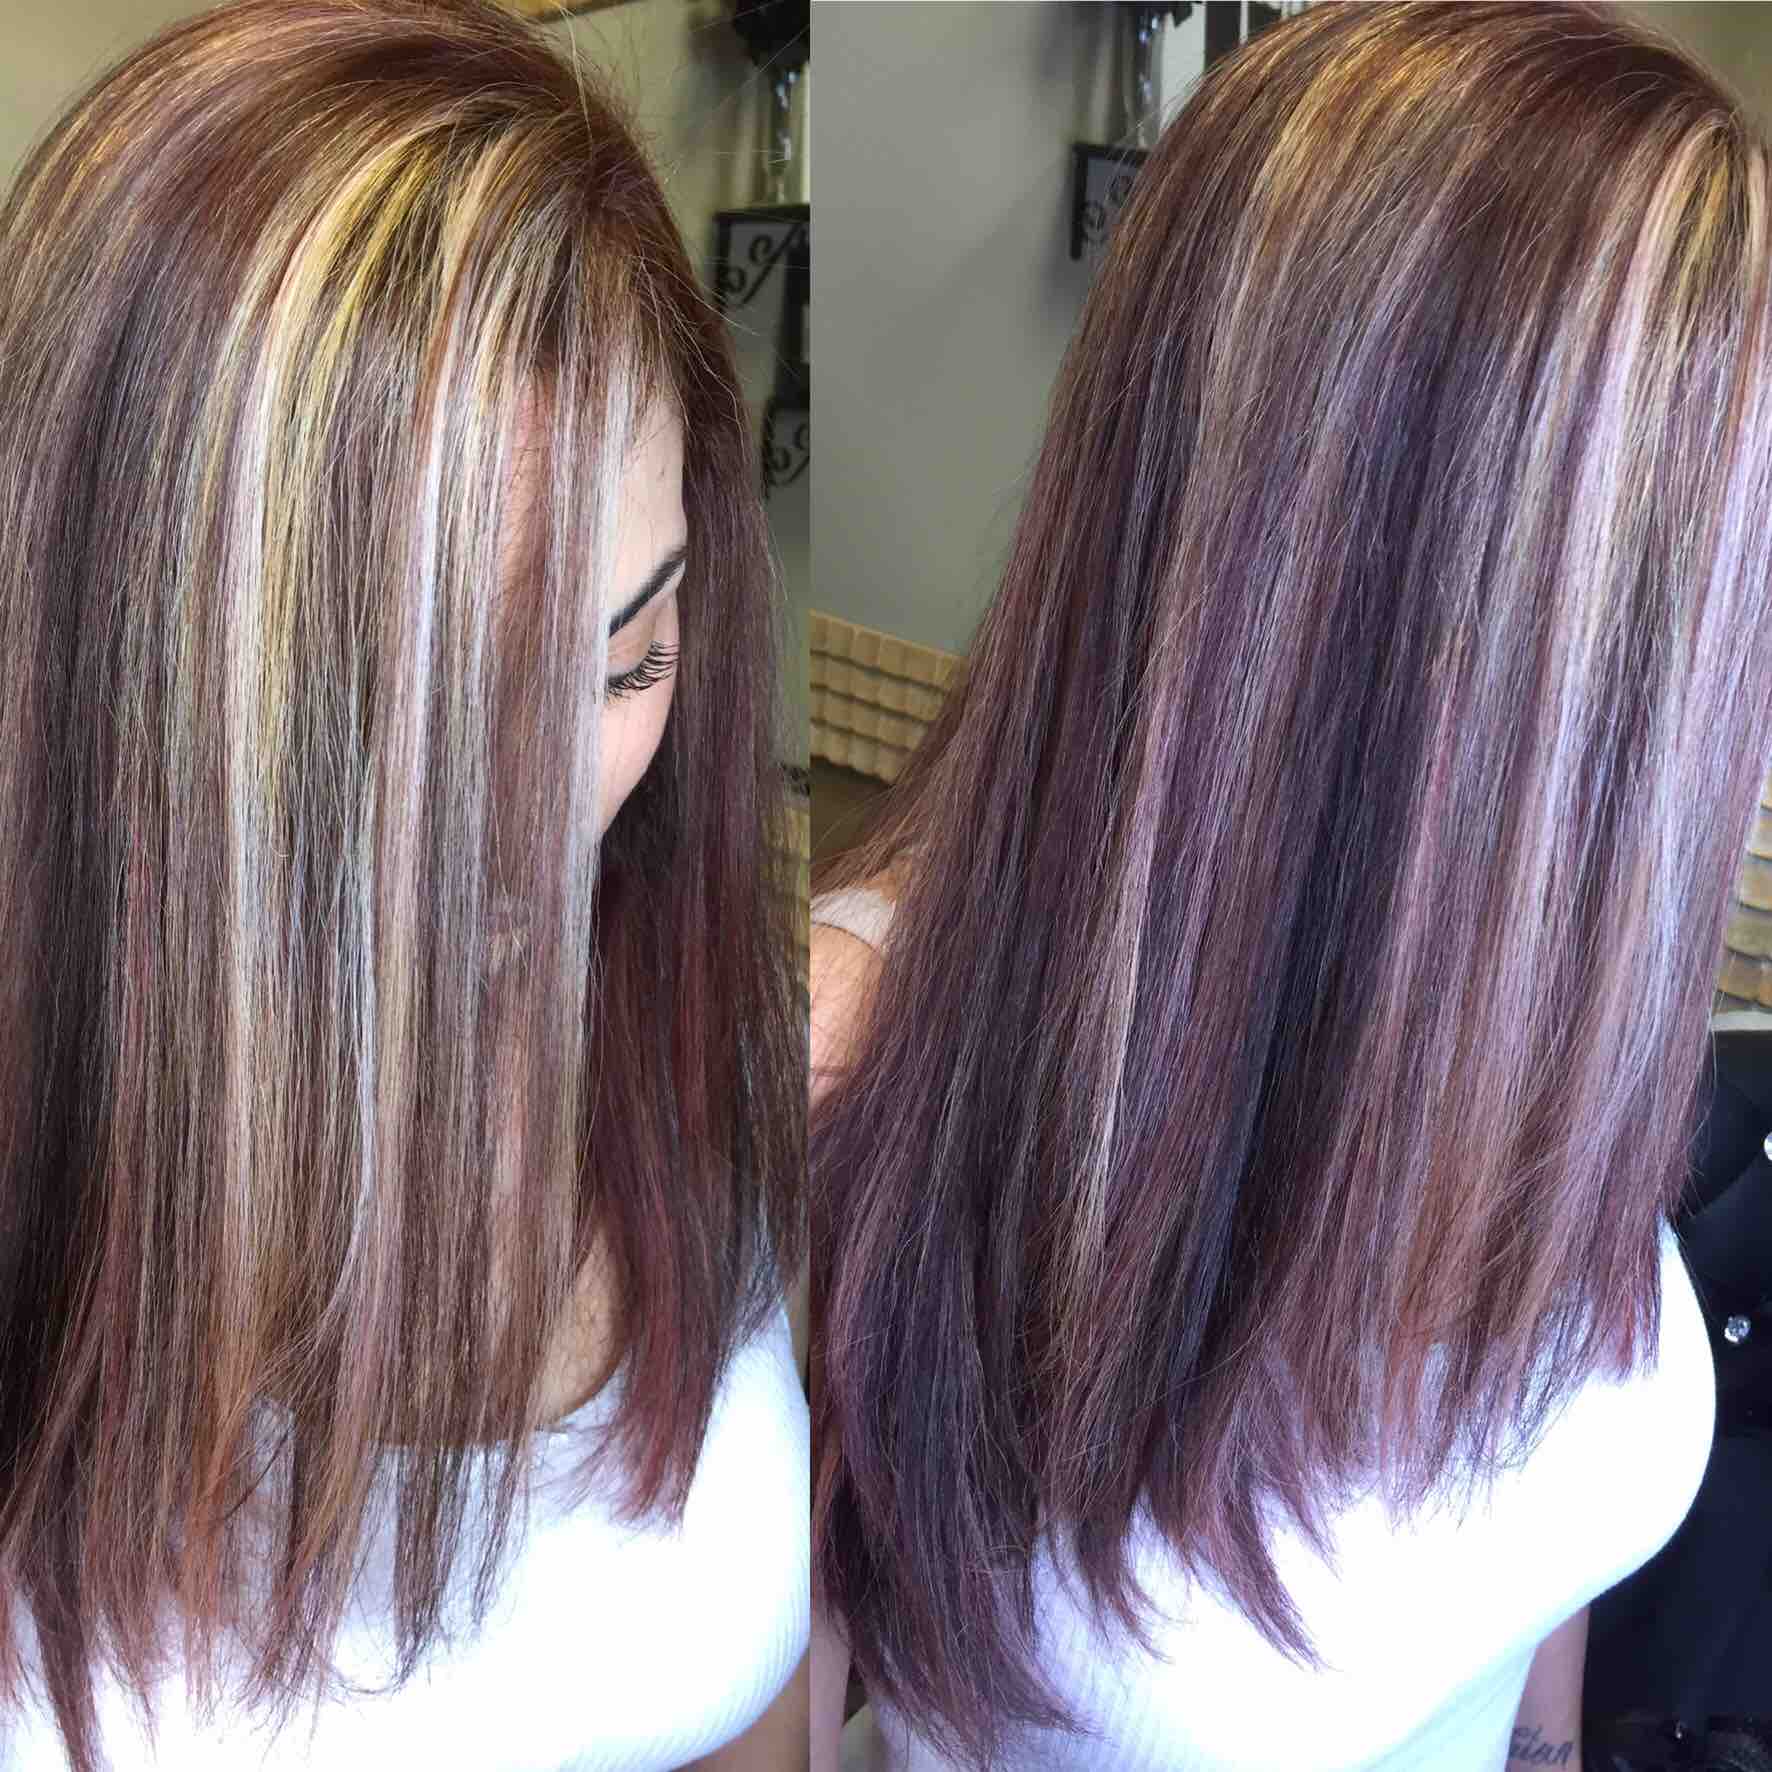 Hair Color Touch Up (3 Weeks)